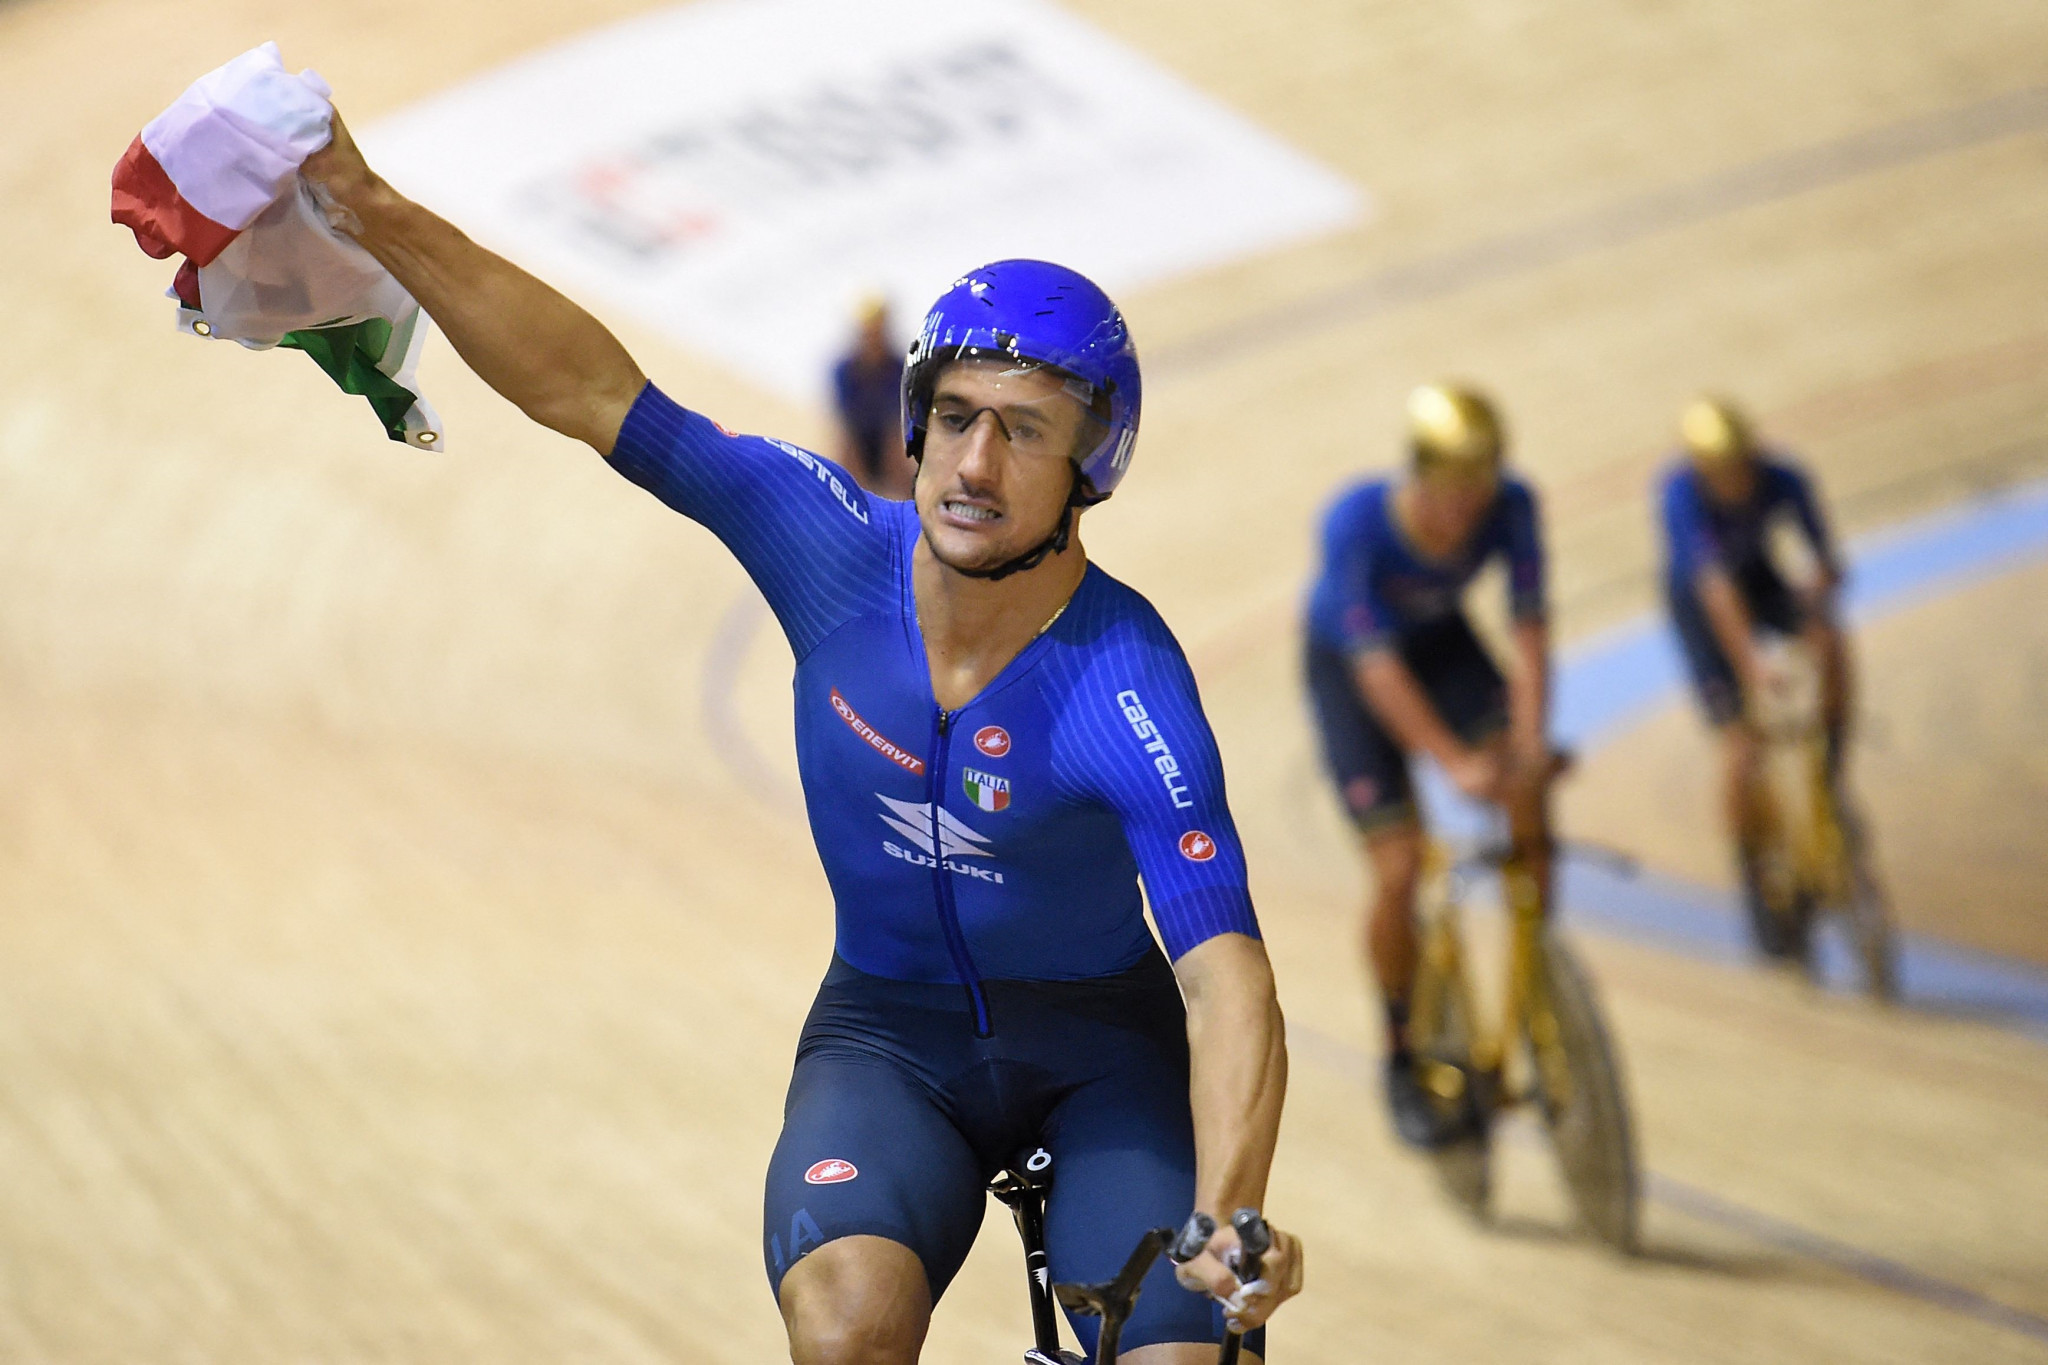 Liam Bertazzo celebrates after winning the men's team pursuit - but the bikes used by the victorious Italian riders have been stolen ©Getty Images